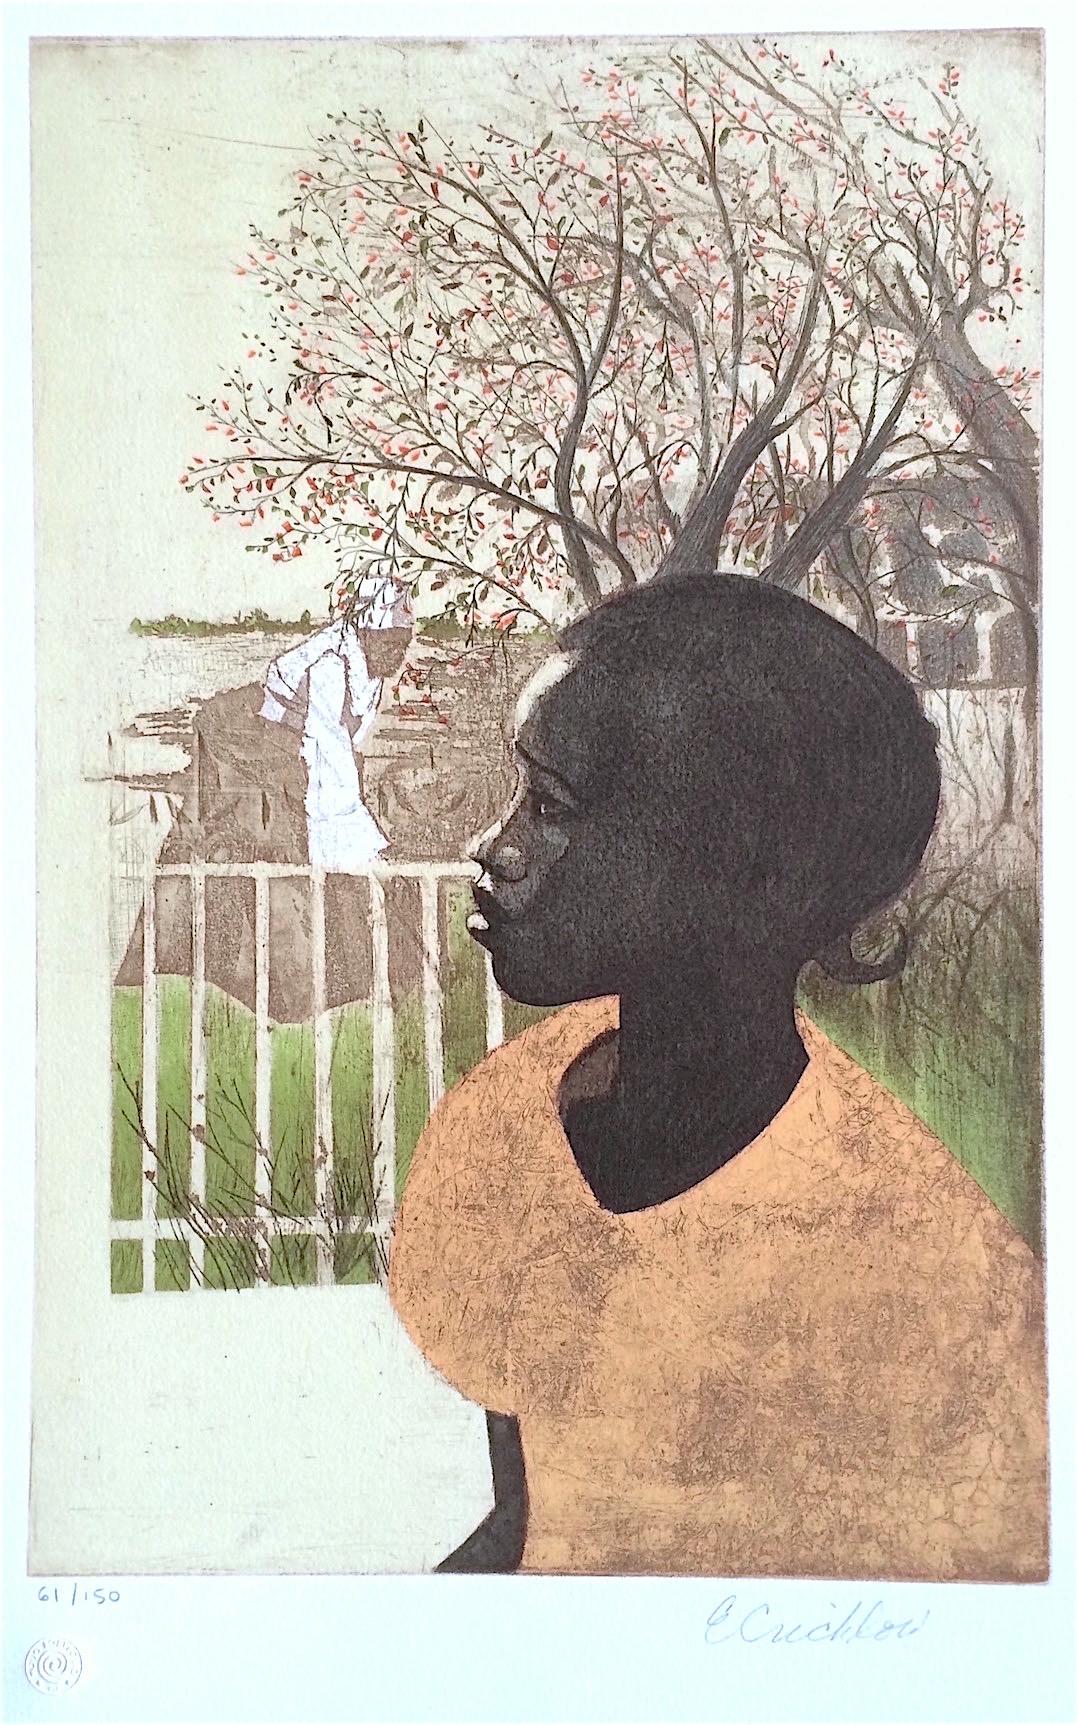 NEW DREAMS Original Lithograph, Black History, African American Women - Print by Ernest Crichlow